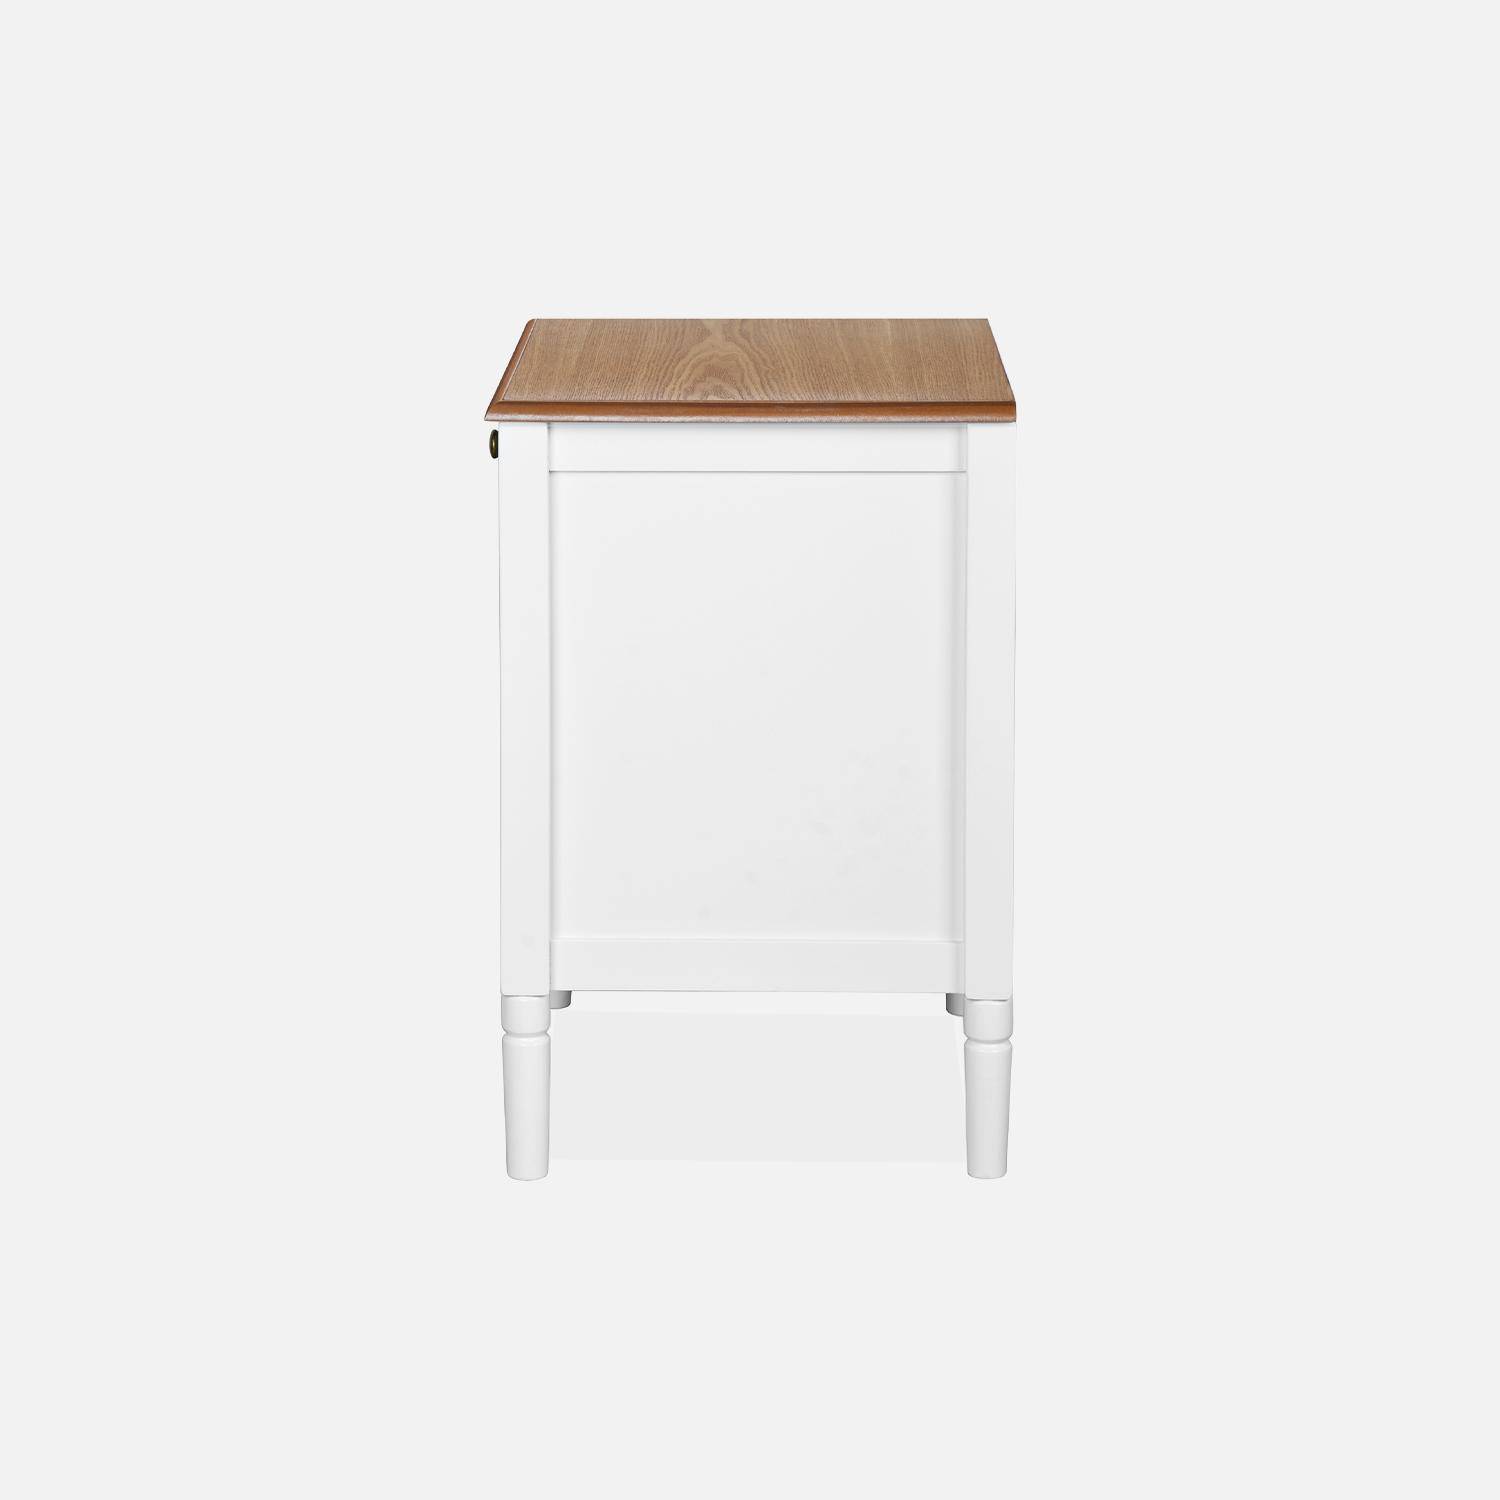 Bedside table with pinewood legs, 45x40x60cm - Celeste - White Photo6